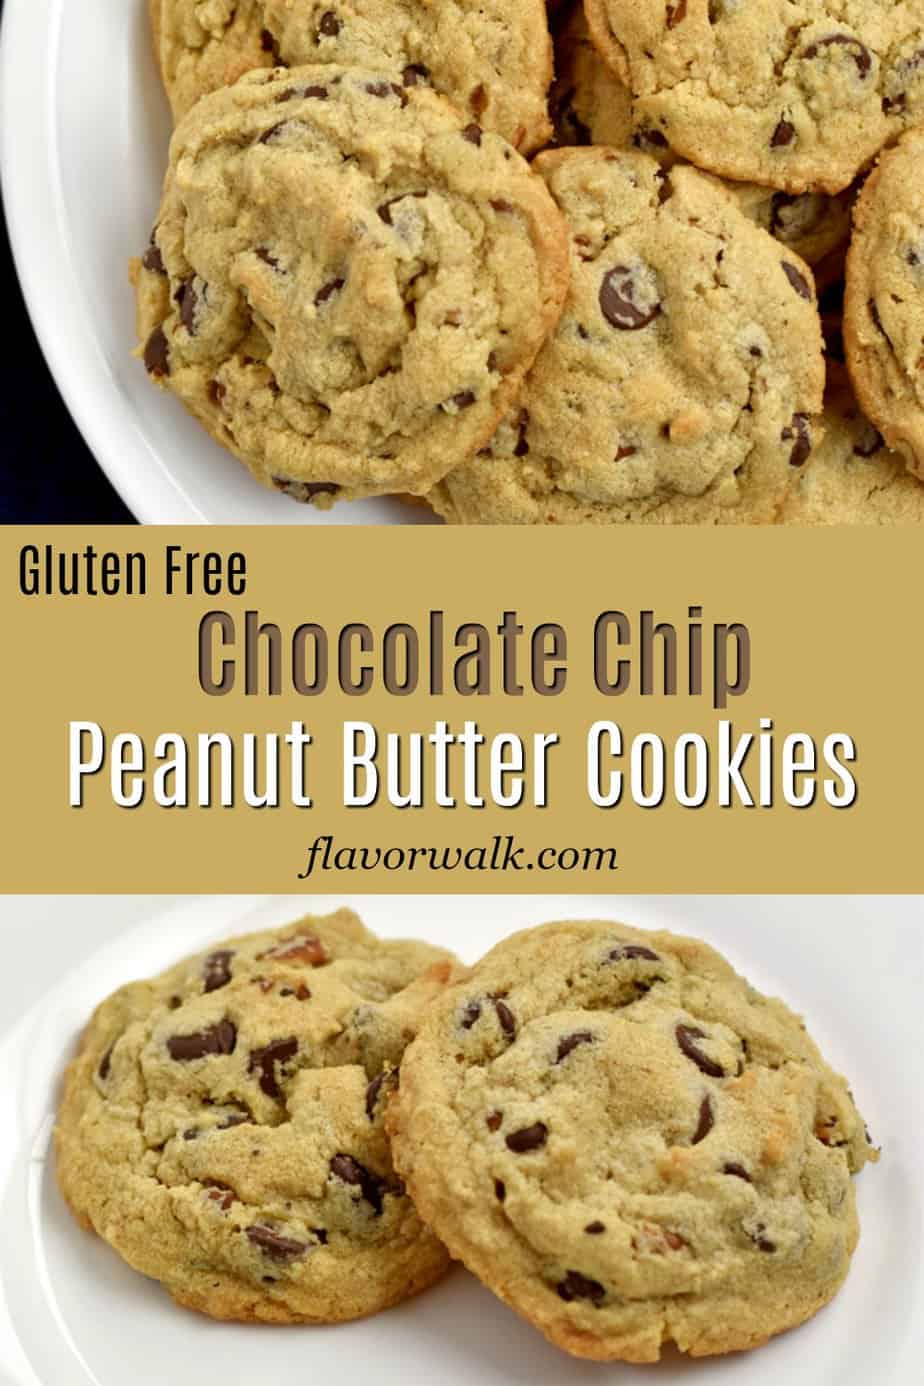 These are the best gluten free chocolate chip peanut butter cookies! They are crisp around the edges, but soft and tender in the middle. Love the combination of chocolate and peanut butter? These gluten free cookies are for you!